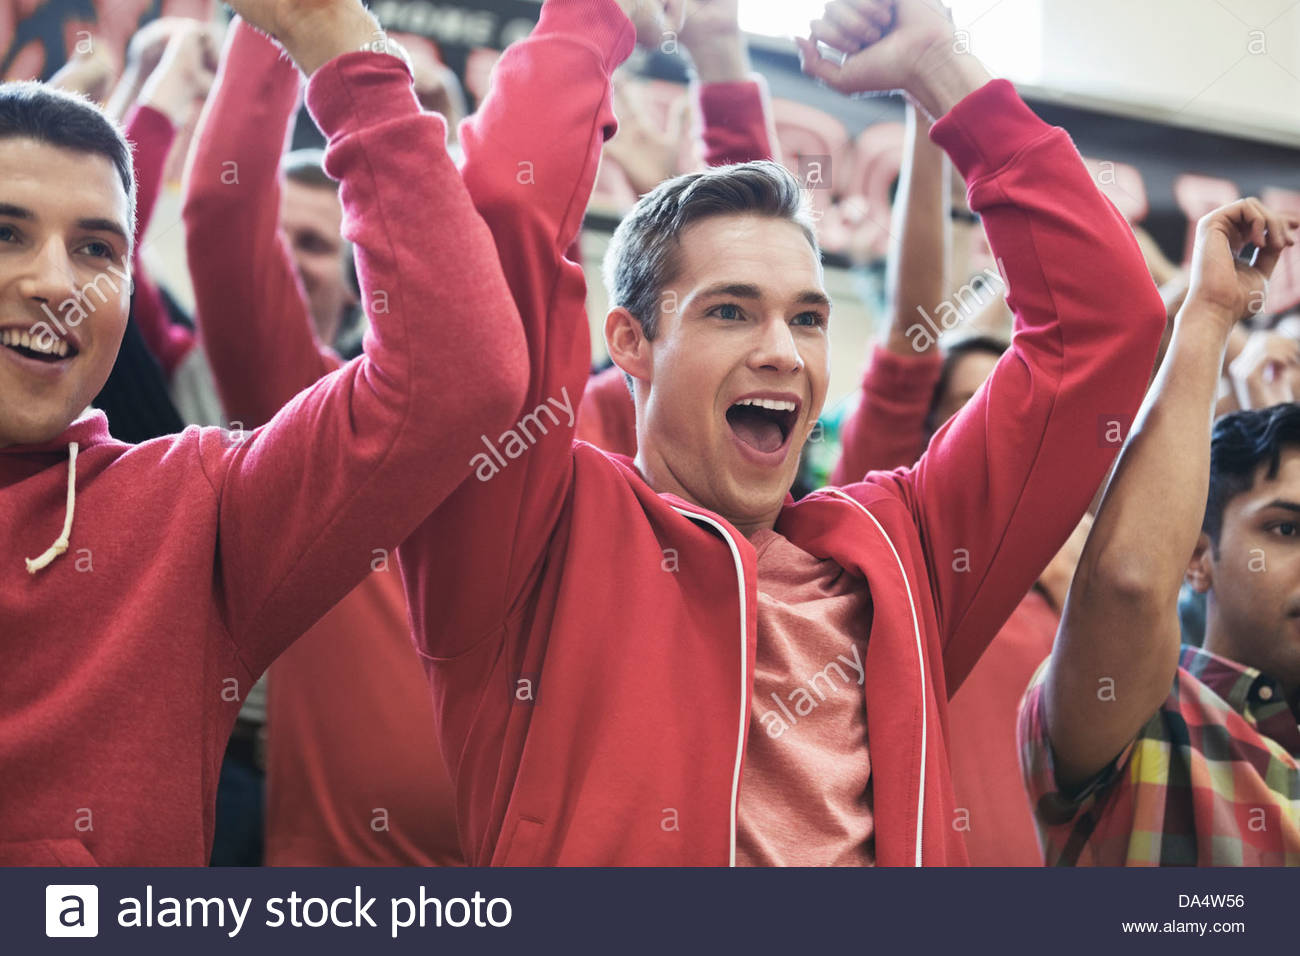 Group of students cheering at college sporting event Stock Photo